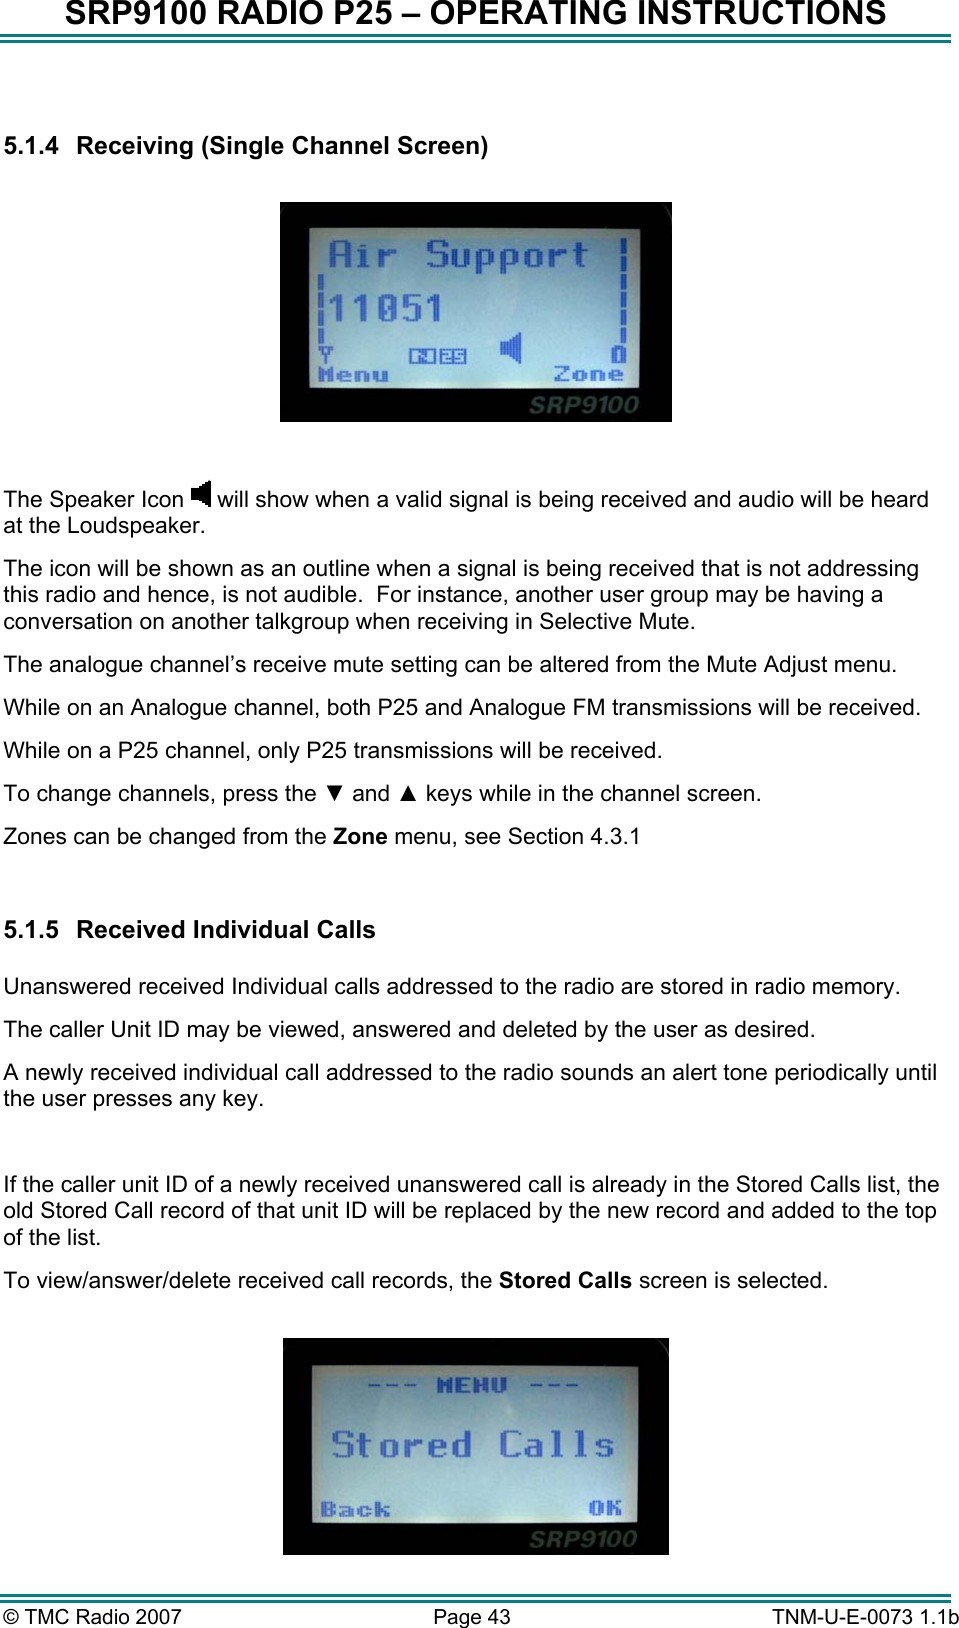 SRP9100 RADIO P25 – OPERATING INSTRUCTIONS  5.1.4  Receiving (Single Channel Screen)    The Speaker Icon   will show when a valid signal is being received and audio will be heard at the Loudspeaker.   The icon will be shown as an outline when a signal is being received that is not addressing this radio and hence, is not audible.  For instance, another user group may be having a conversation on another talkgroup when receiving in Selective Mute. The analogue channel’s receive mute setting can be altered from the Mute Adjust menu. While on an Analogue channel, both P25 and Analogue FM transmissions will be received. While on a P25 channel, only P25 transmissions will be received. To change channels, press the ▼ and ▲ keys while in the channel screen. Zones can be changed from the Zone menu, see Section 4.3.1  5.1.5  Received Individual Calls   Unanswered received Individual calls addressed to the radio are stored in radio memory.   The caller Unit ID may be viewed, answered and deleted by the user as desired.   A newly received individual call addressed to the radio sounds an alert tone periodically until the user presses any key.  If the caller unit ID of a newly received unanswered call is already in the Stored Calls list, the old Stored Call record of that unit ID will be replaced by the new record and added to the top of the list. To view/answer/delete received call records, the Stored Calls screen is selected.   © TMC Radio 2007  Page 43   TNM-U-E-0073 1.1b 